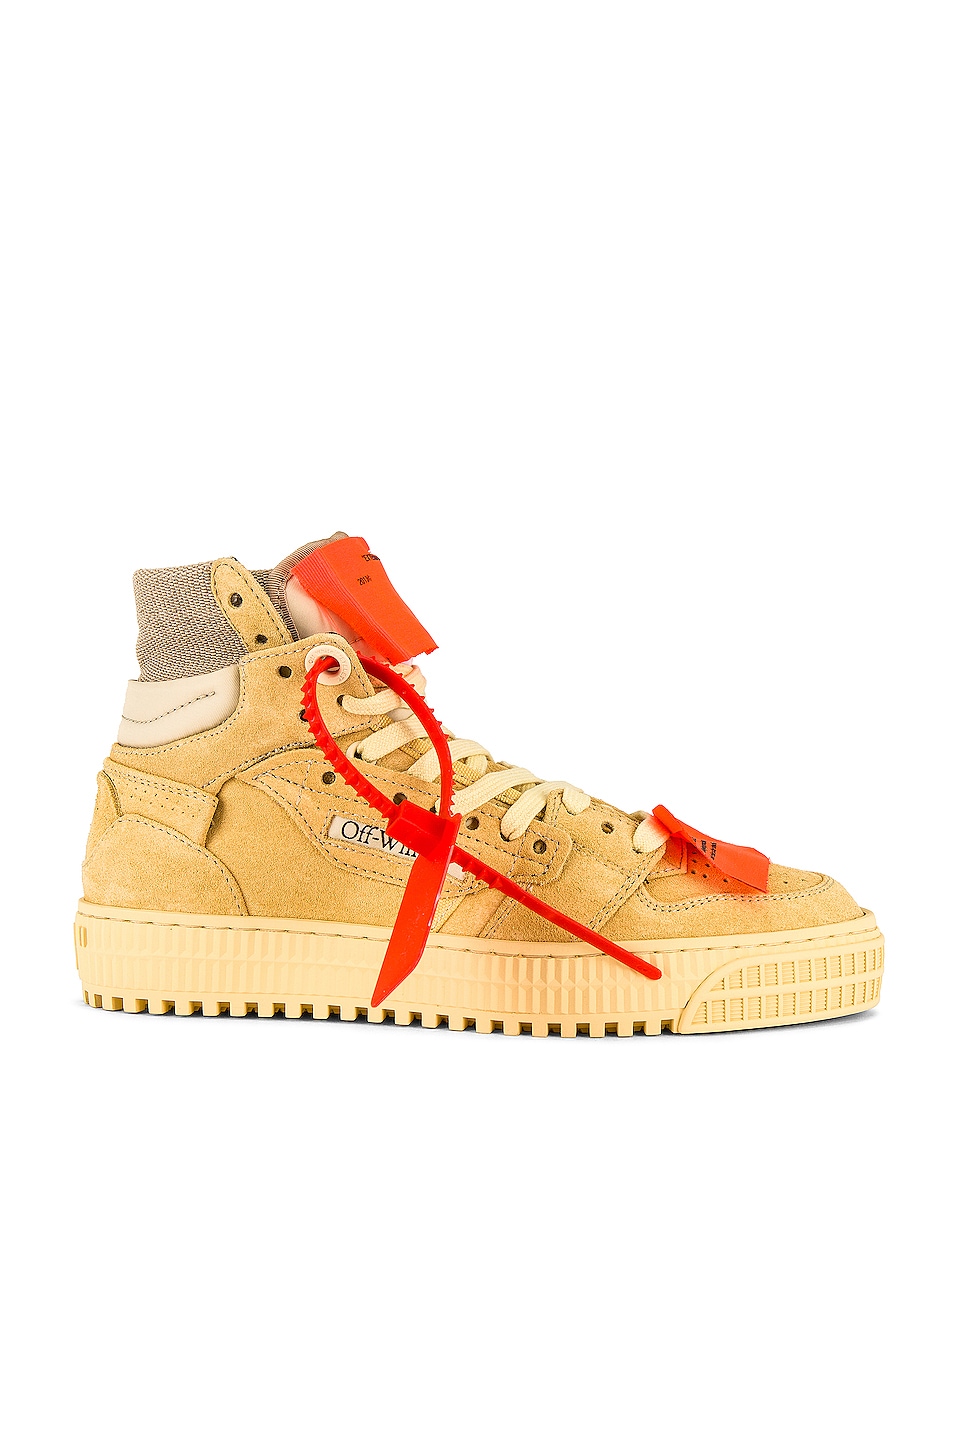 OFF-WHITE 3.0 Off Court Sneakers in Beige | REVOLVE